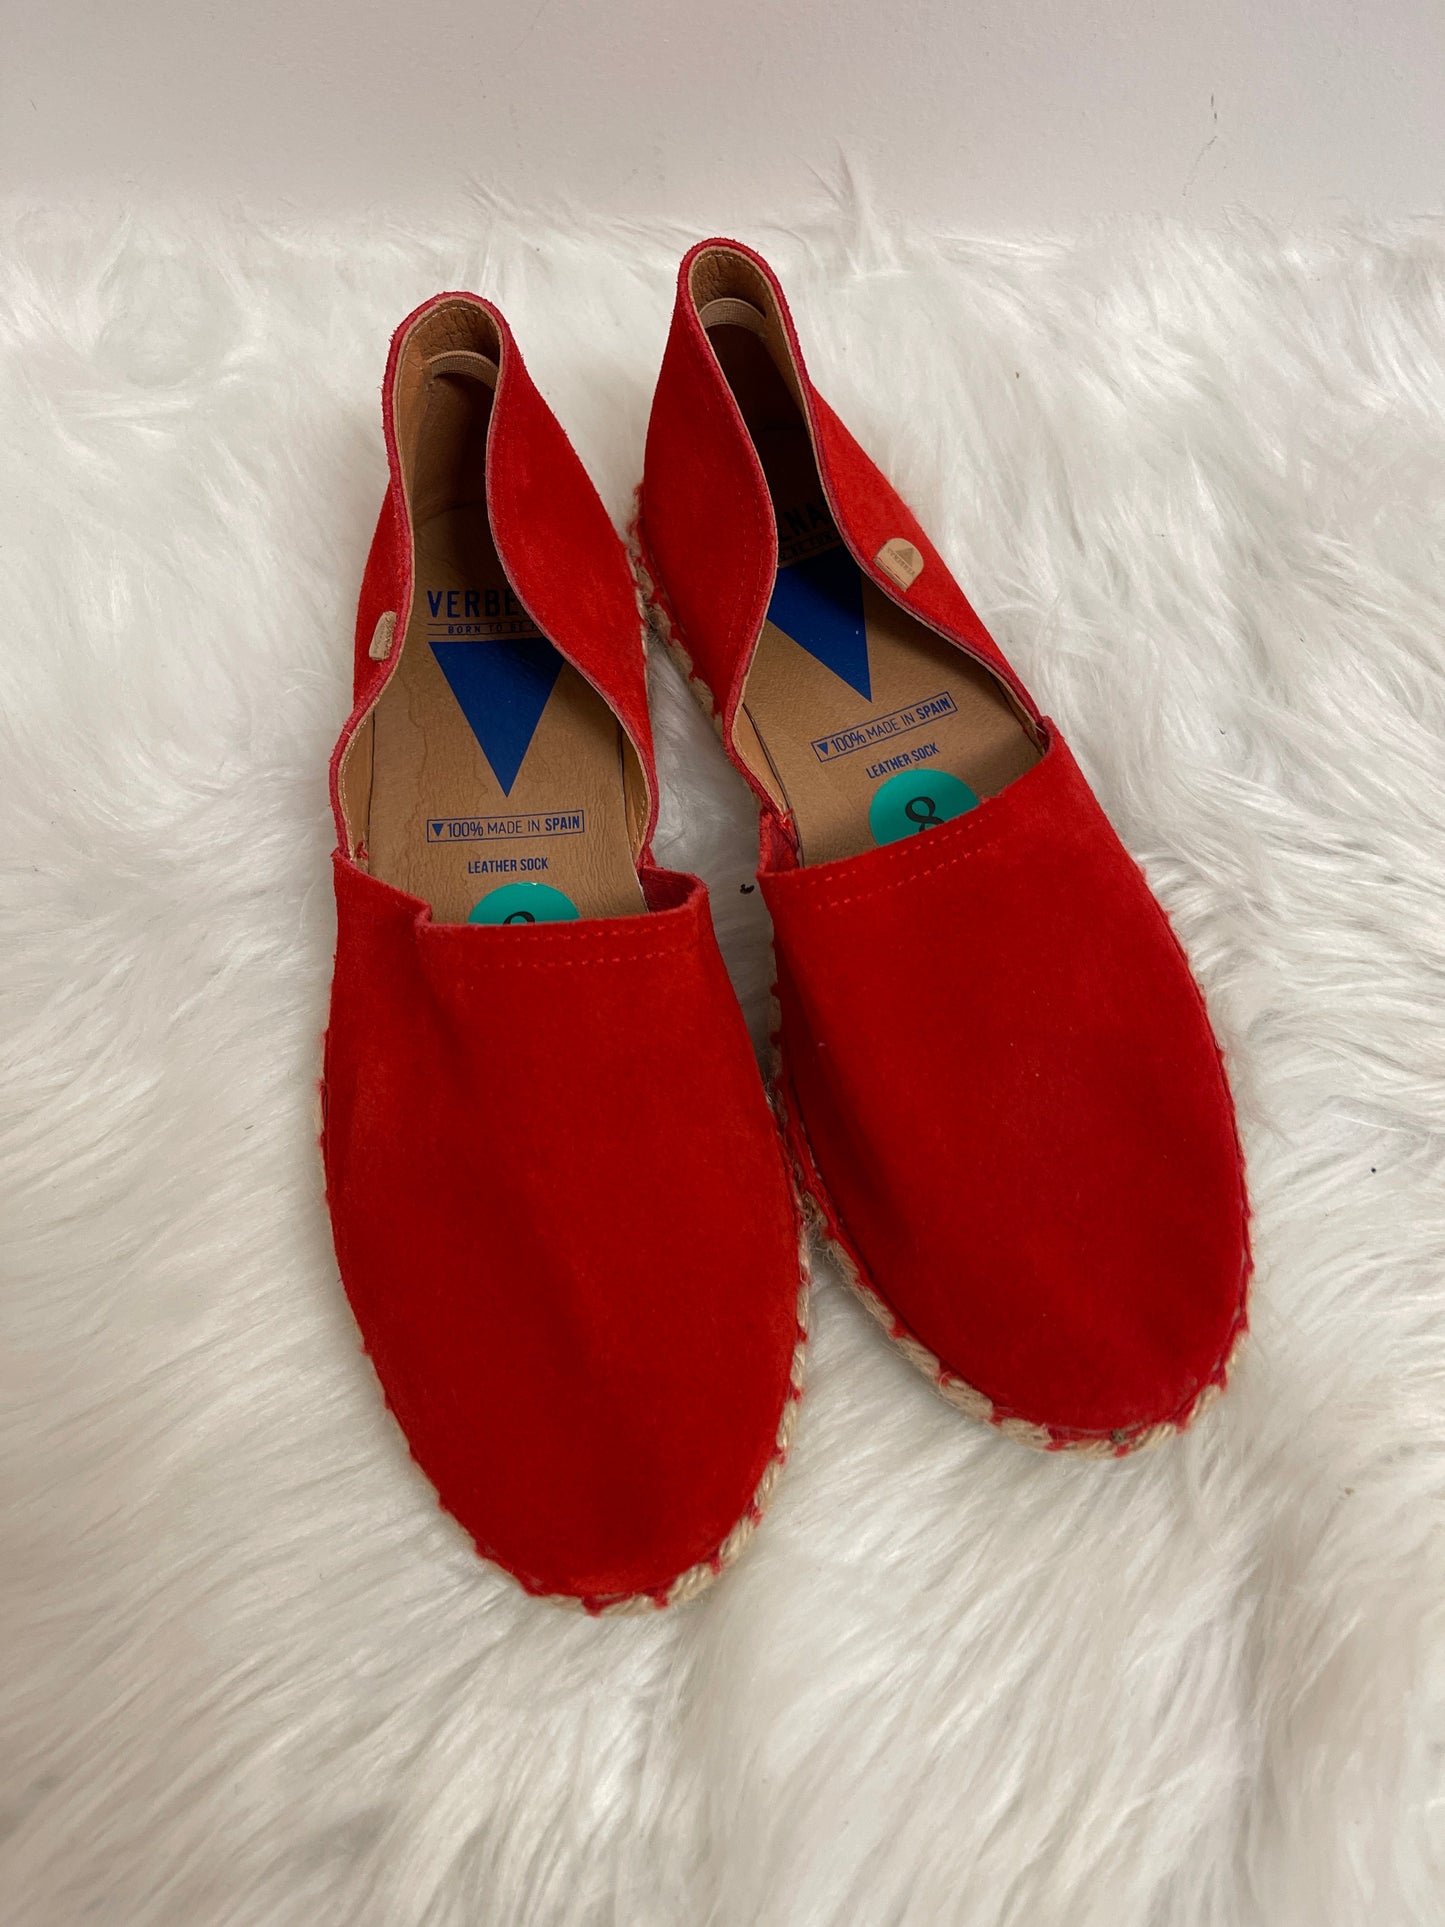 Red Shoes Flats Clothes Mentor, Size 8